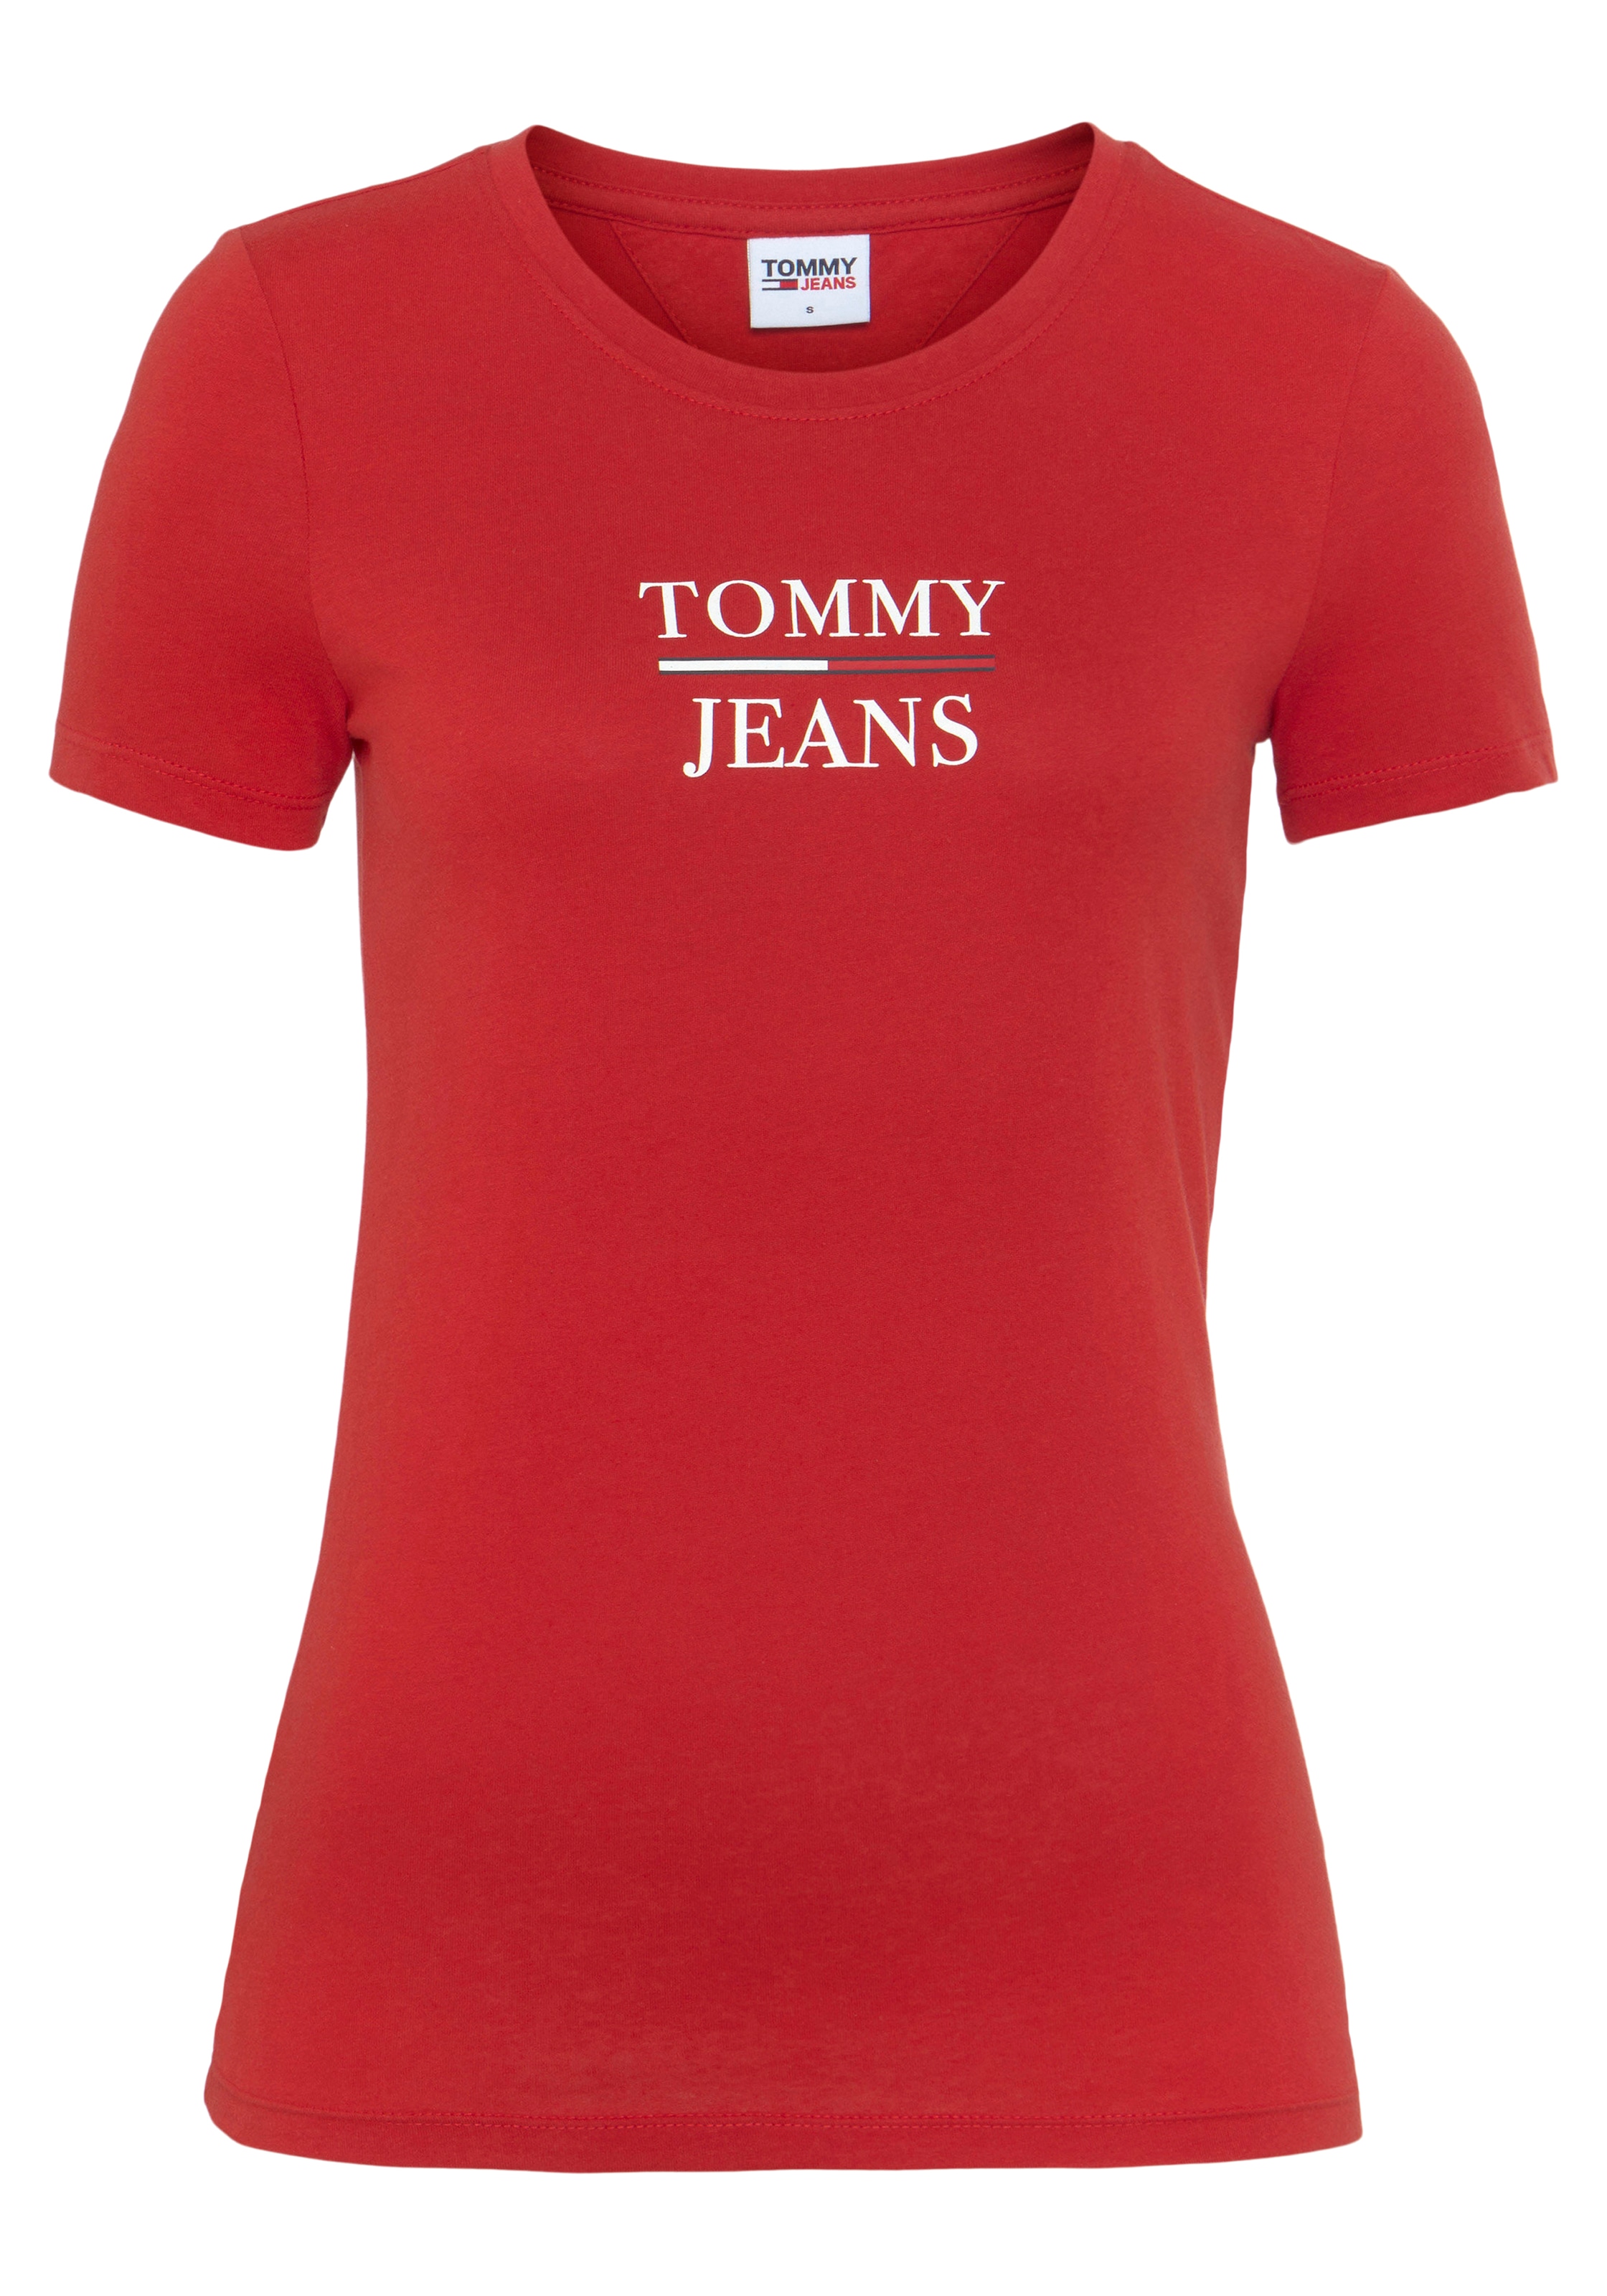 SS«, Tommy 2PACK (Packung, Jeans 2er-Pack) ♕ bei »TJW T TOMMY Skinny T-Shirt ESS